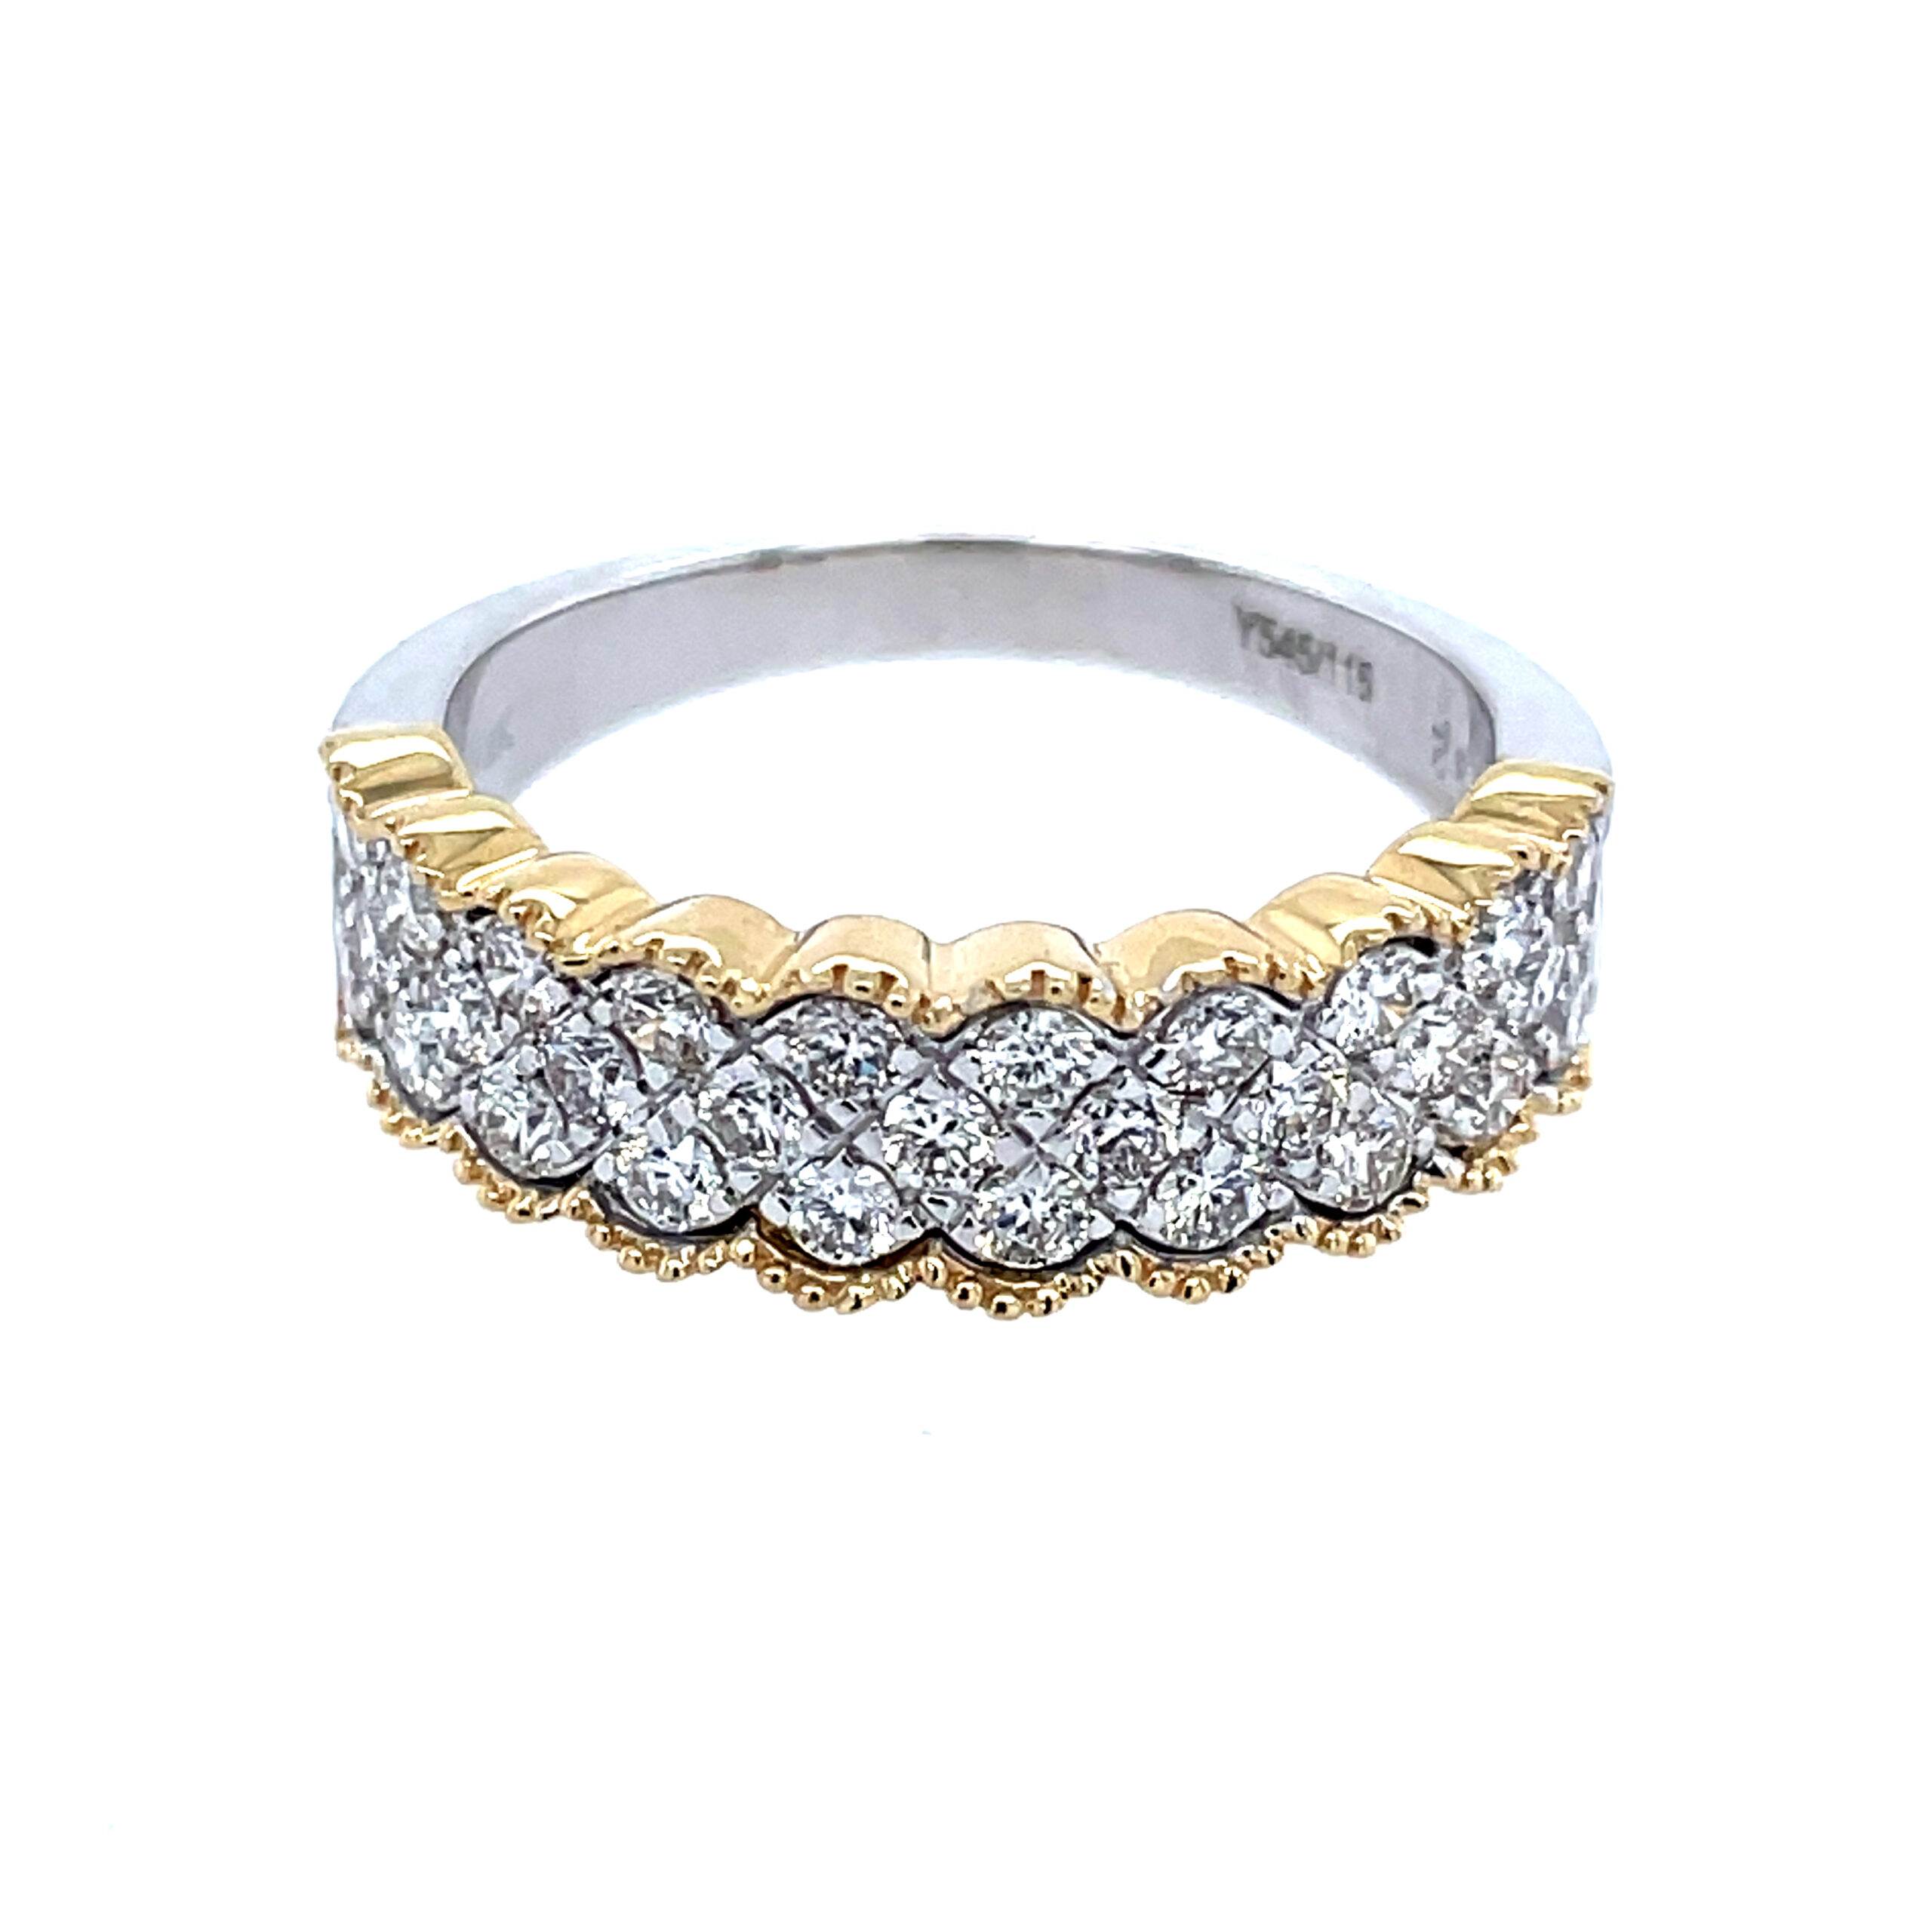 Two Toned Diamond Ring